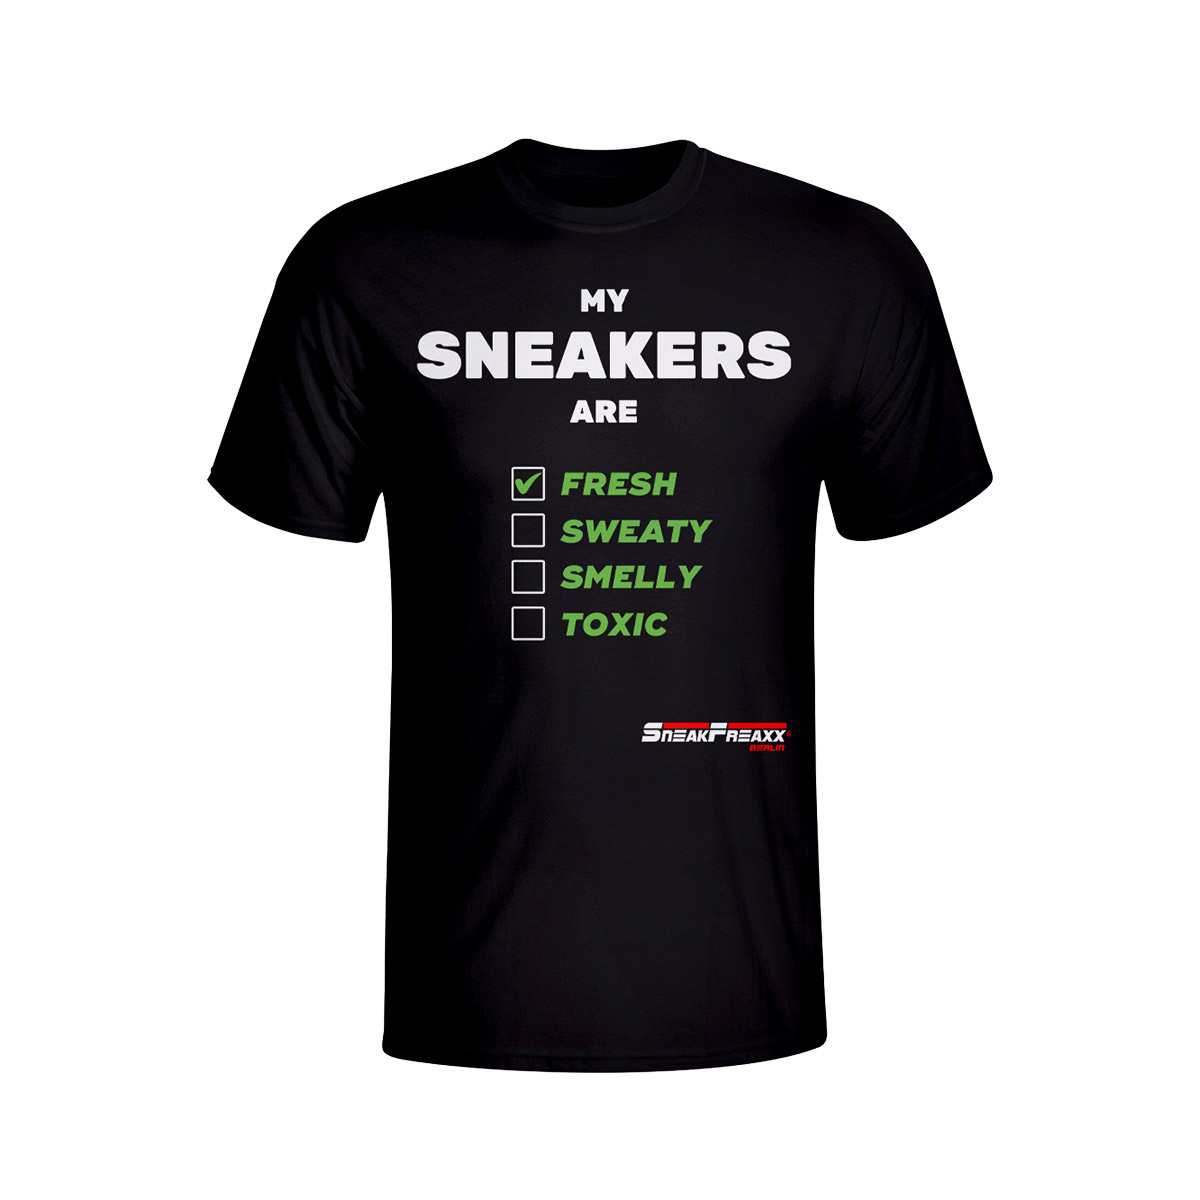 T-SHIRT - MY SNEAKERS ARE - SCHWARZ